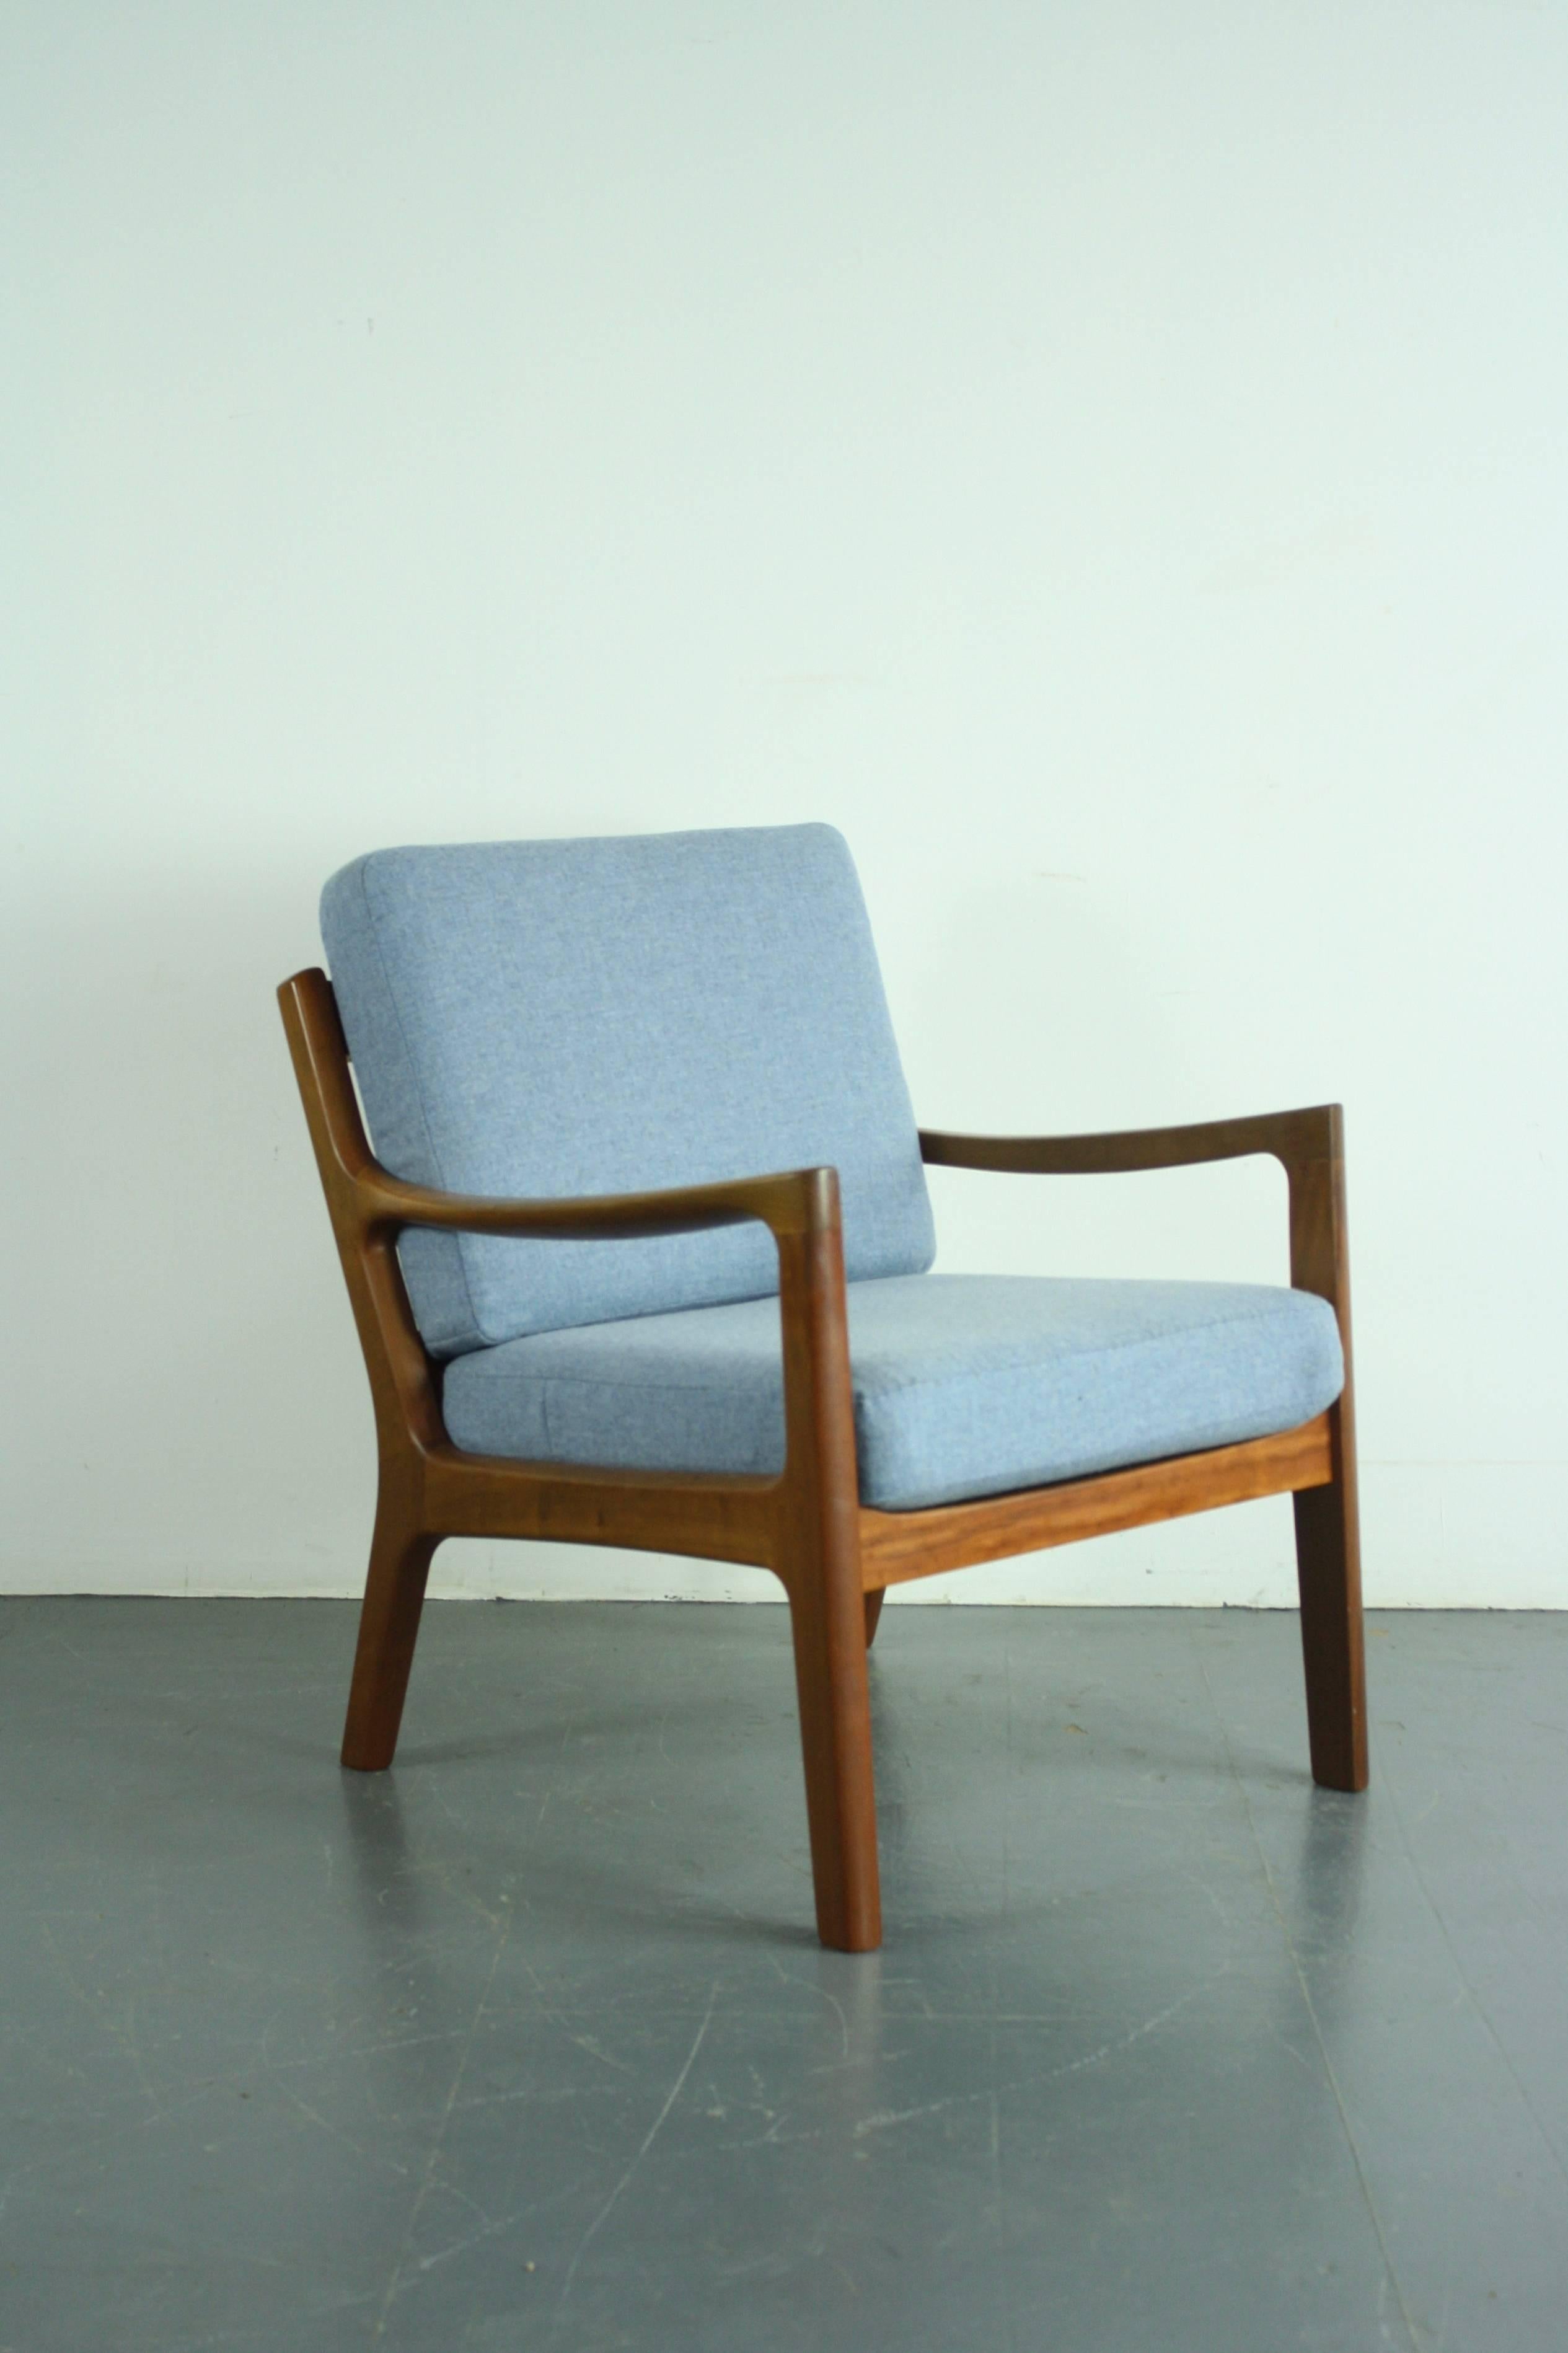 1960s teak lounge chair designed by Ole Wanscher for Peter Jeppeson. Solid teak, with beautifully designed curved arms. With 2 thick spring-loaded cushions, making the chair supremely comfortable, which have been newly upholstered in a beautiful